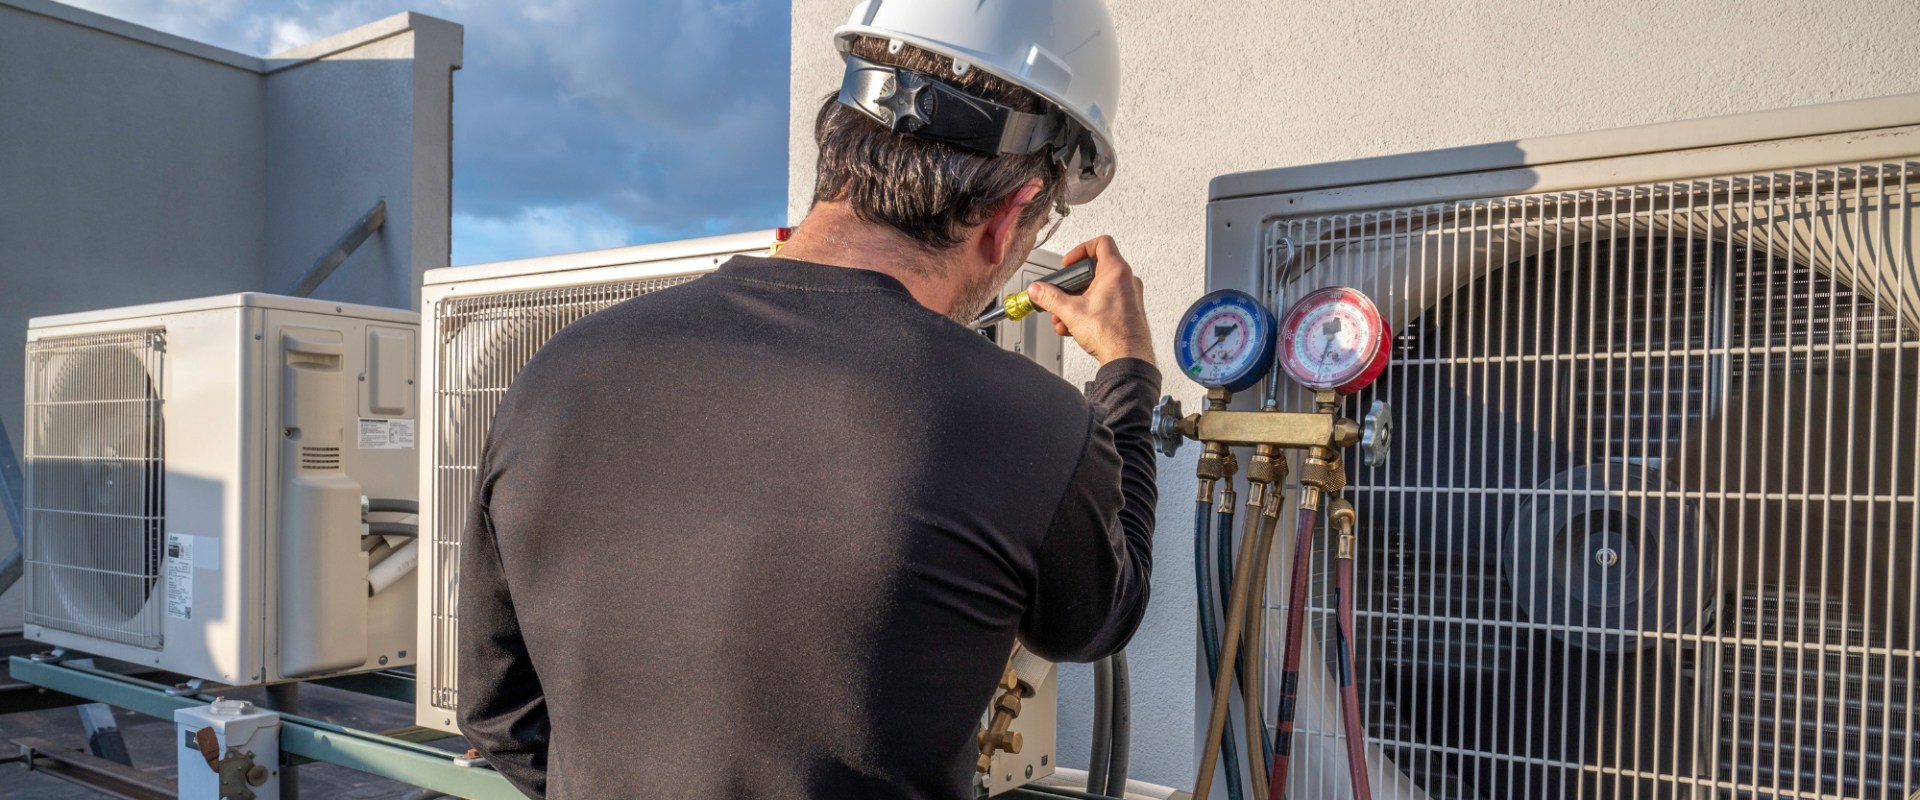 How Long Does it Take to Become an HVAC Technician?